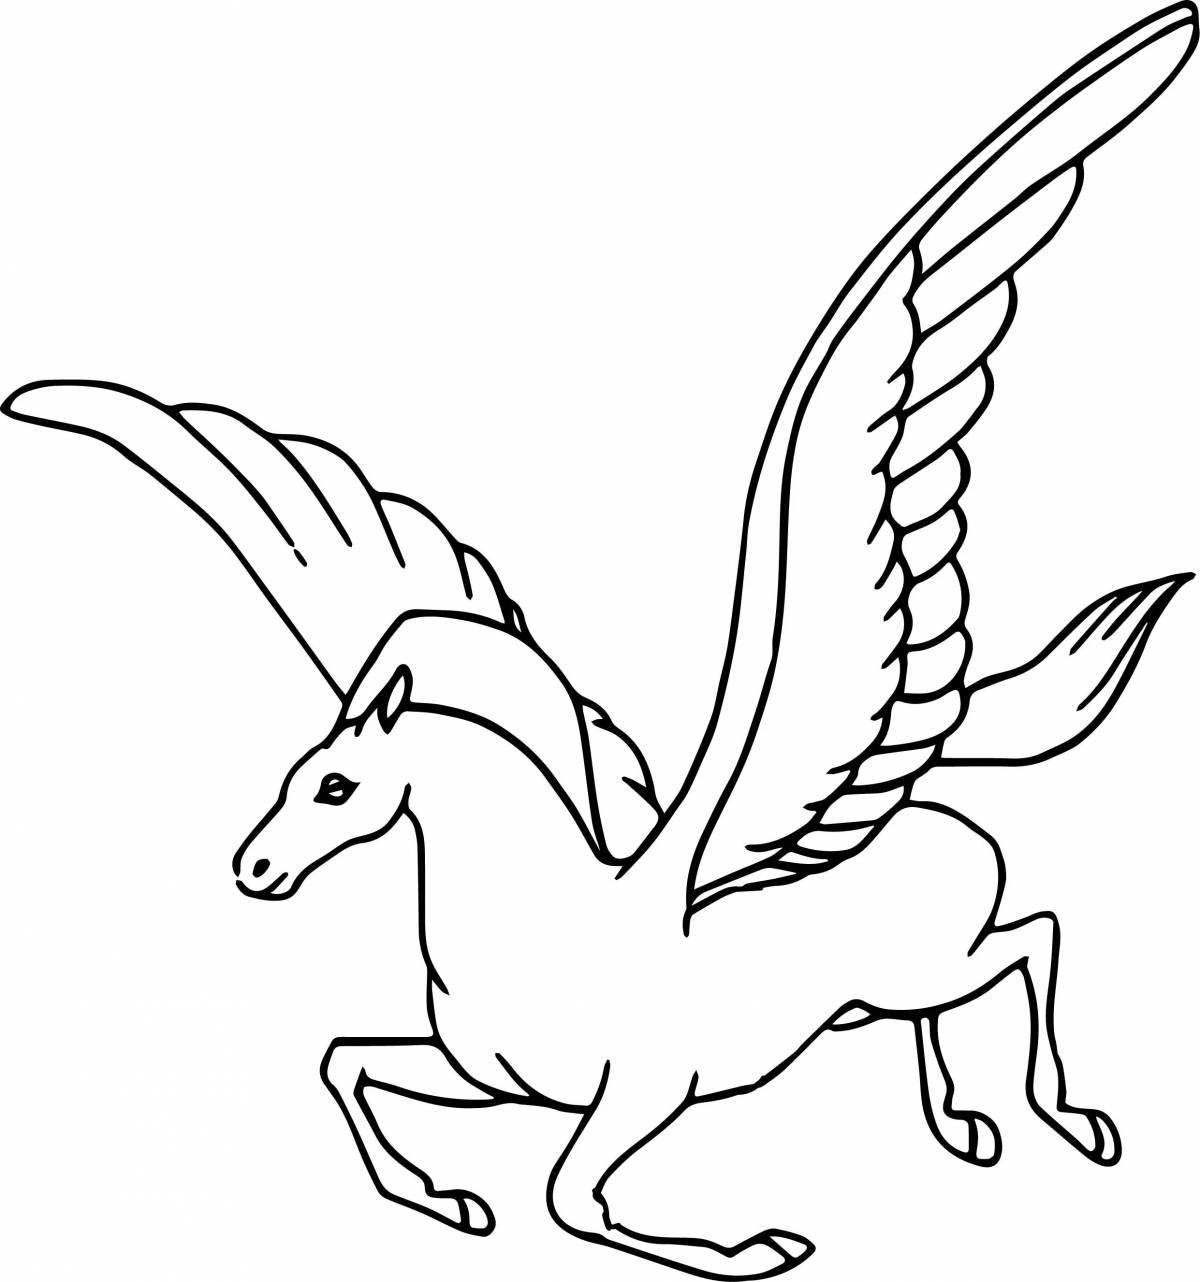 Awesome flying unicorn coloring pages